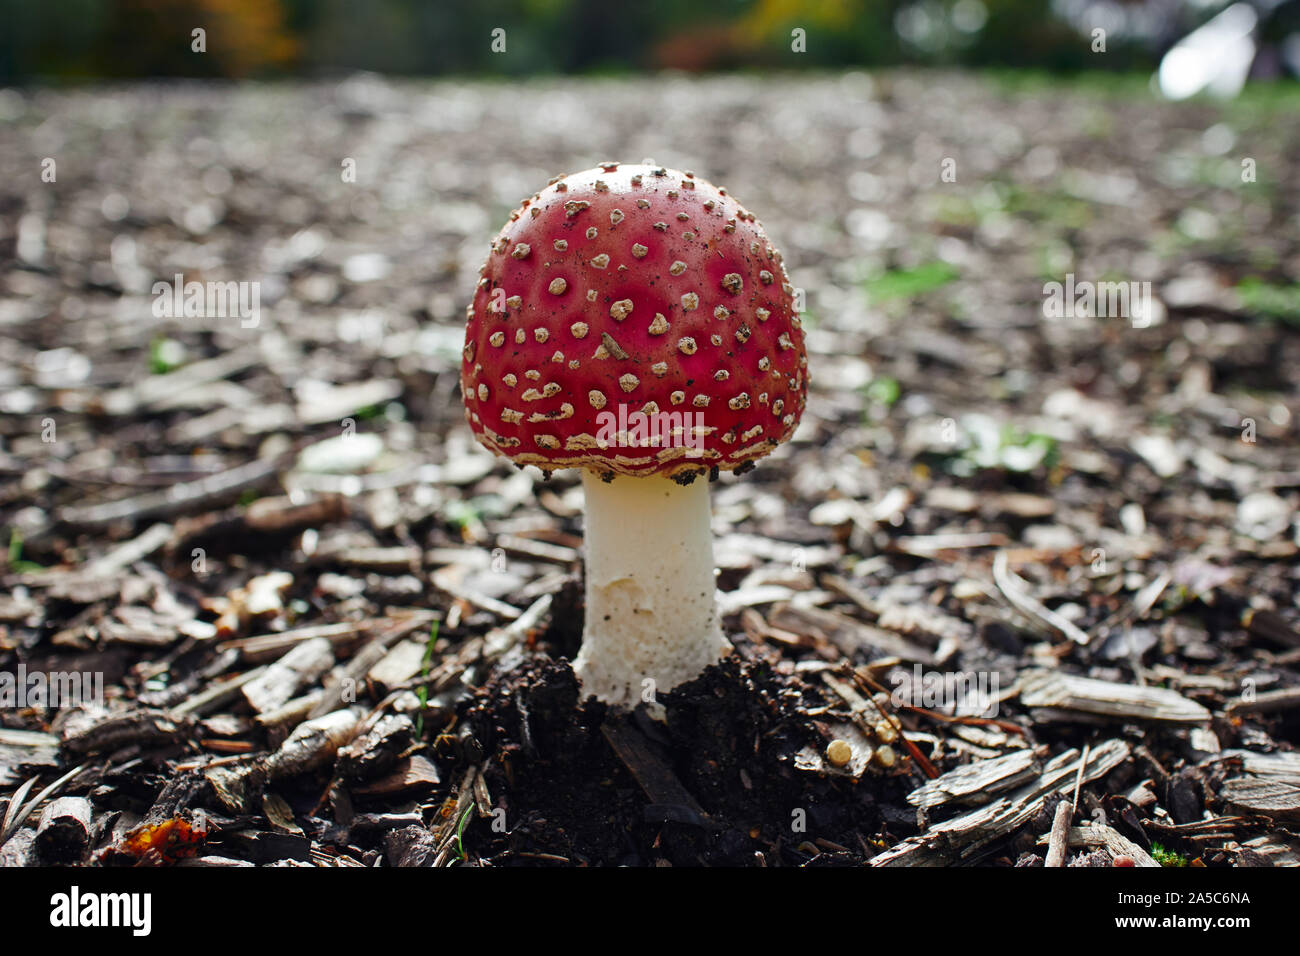 A bright red toadstool (Amanita muscaria) growing in a forest clearing. Stock Photo